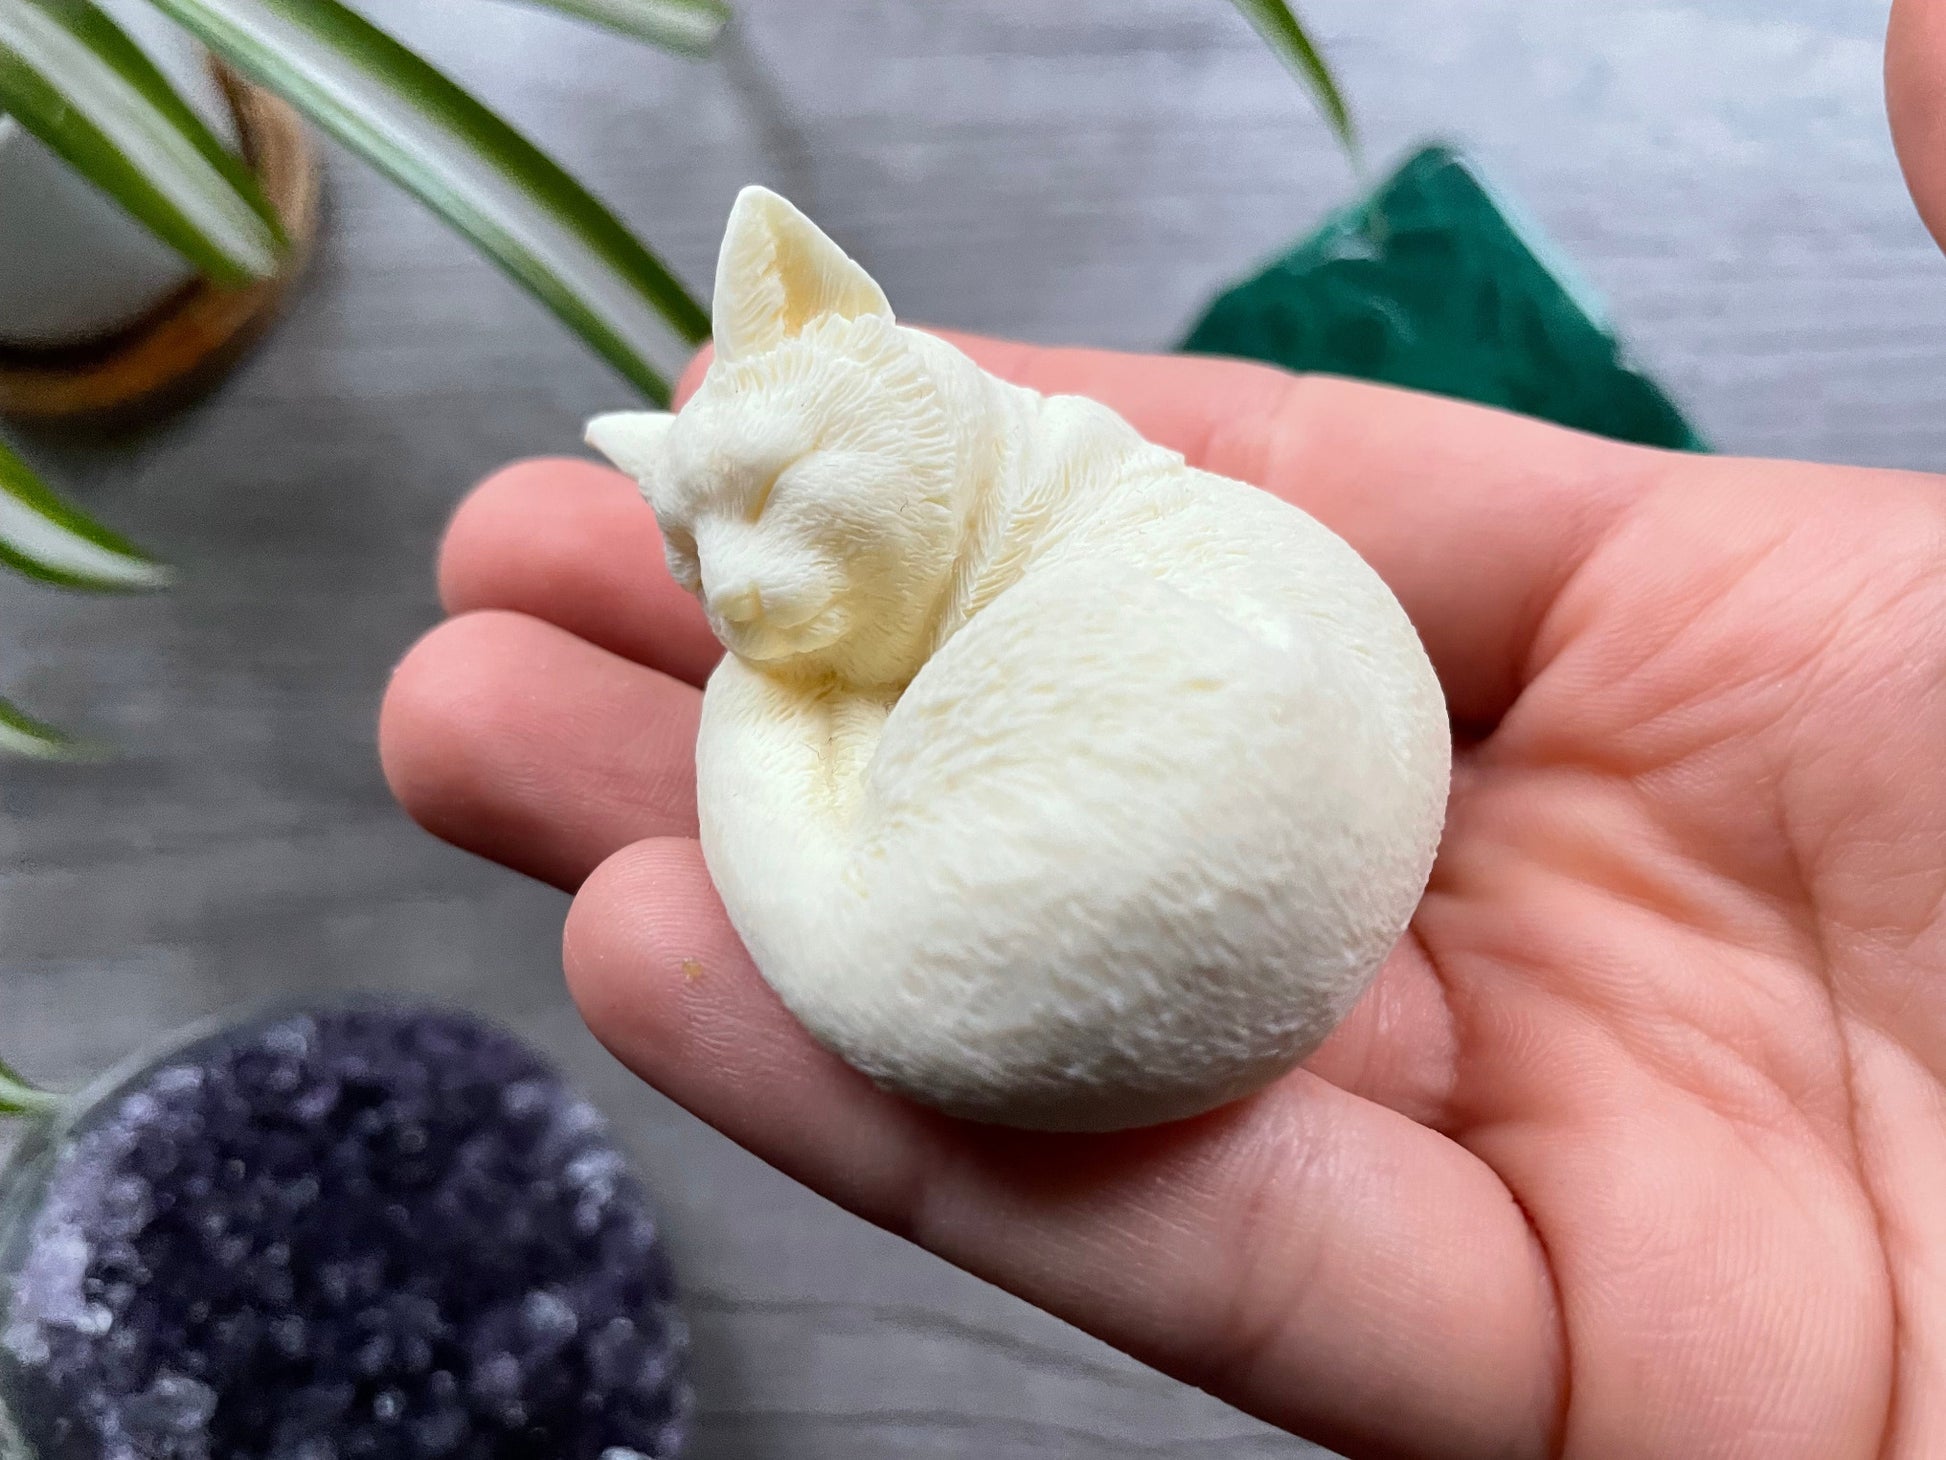 Pictured is a cat carved out of tagua nut.